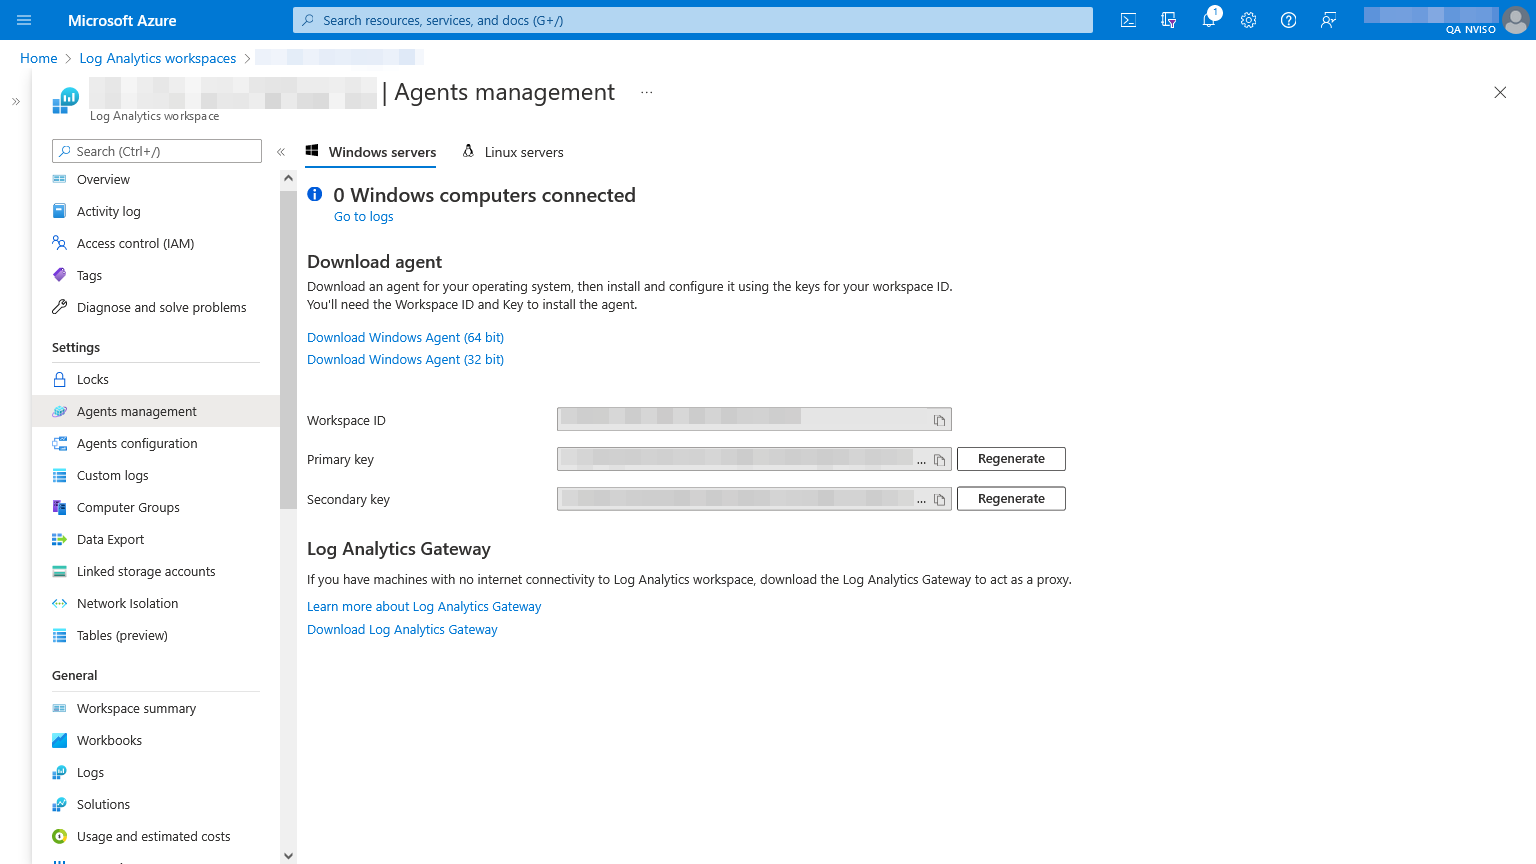 A log analytics workspace&rsquo;s agent management in the Azure portal.